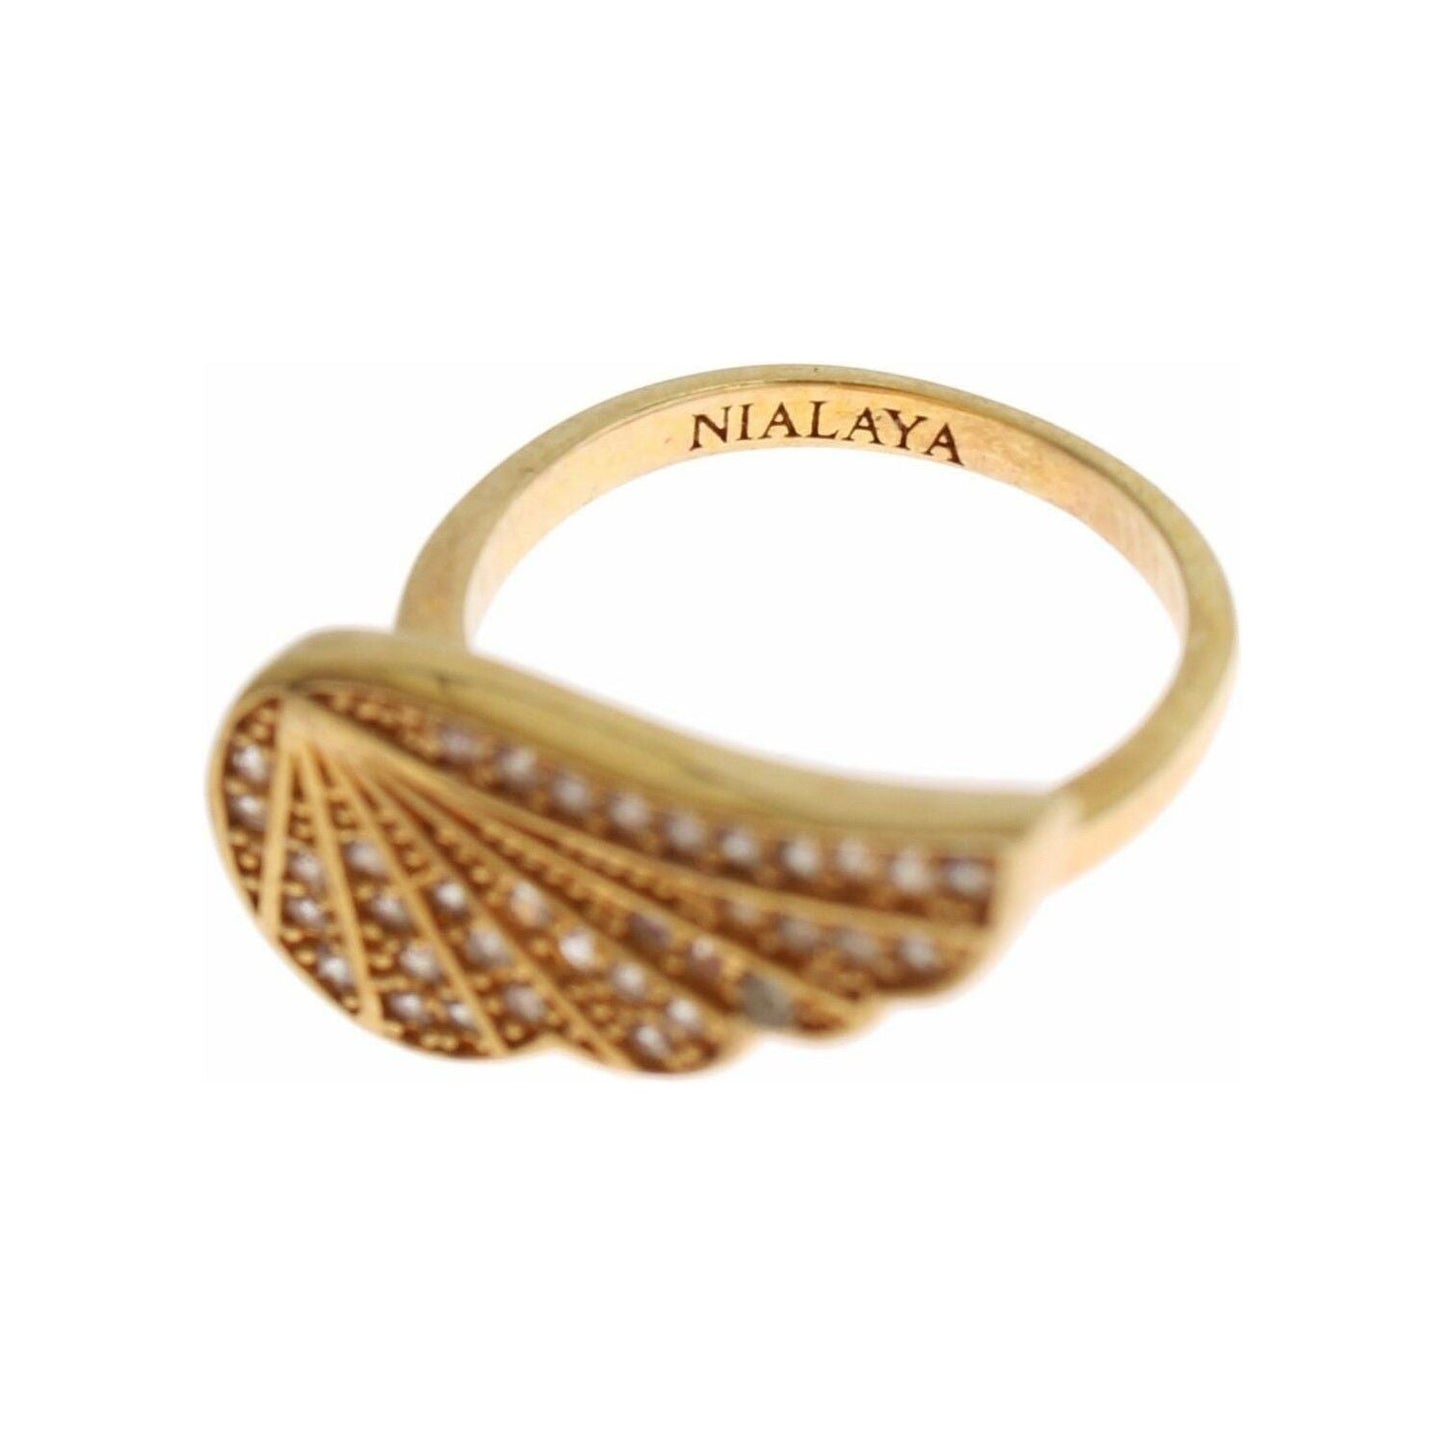 Nialaya Glamorous Gold Plated Crystal Ring Ring womens-clear-cz-gold-925-silver-authentic-ring